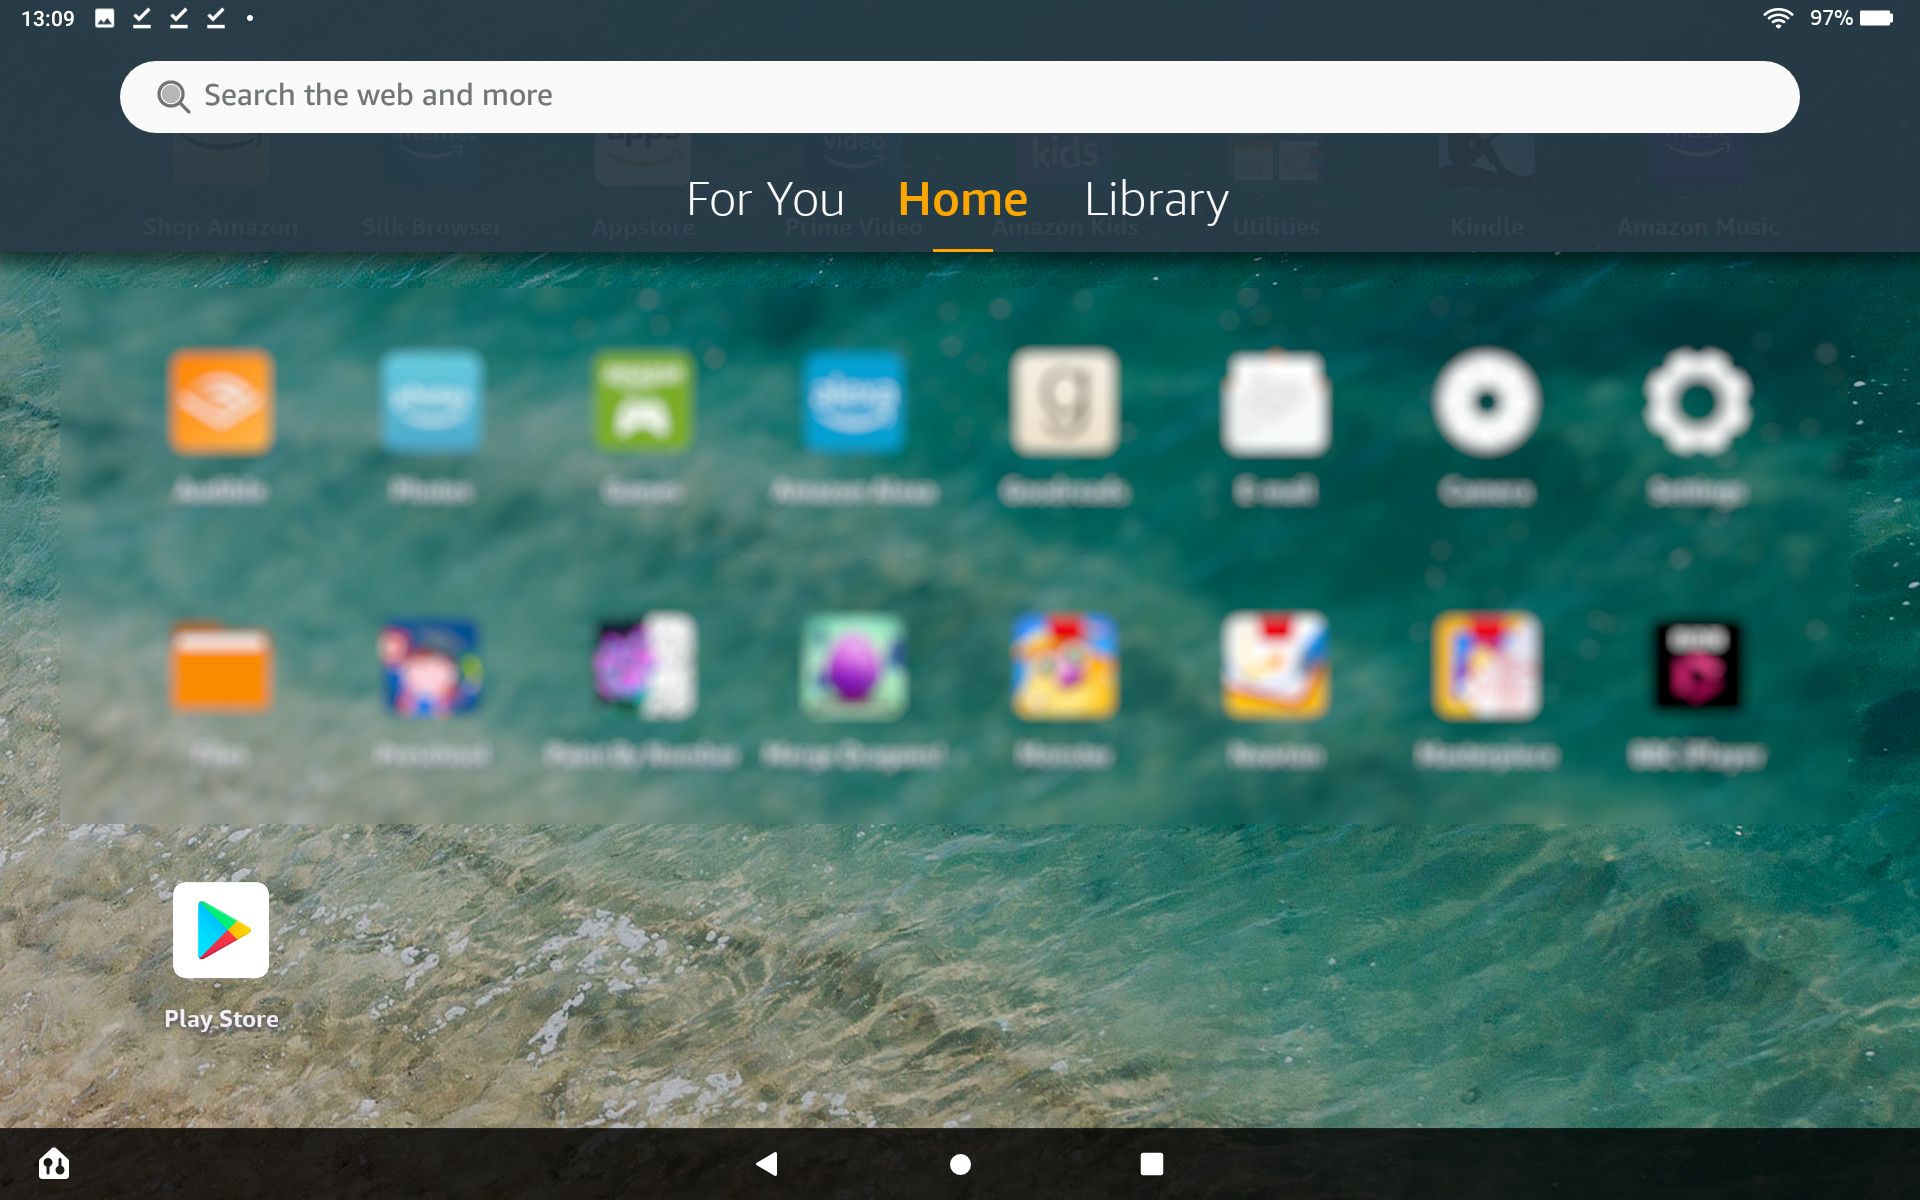 Install Google Play on the Amazon Fire tablet